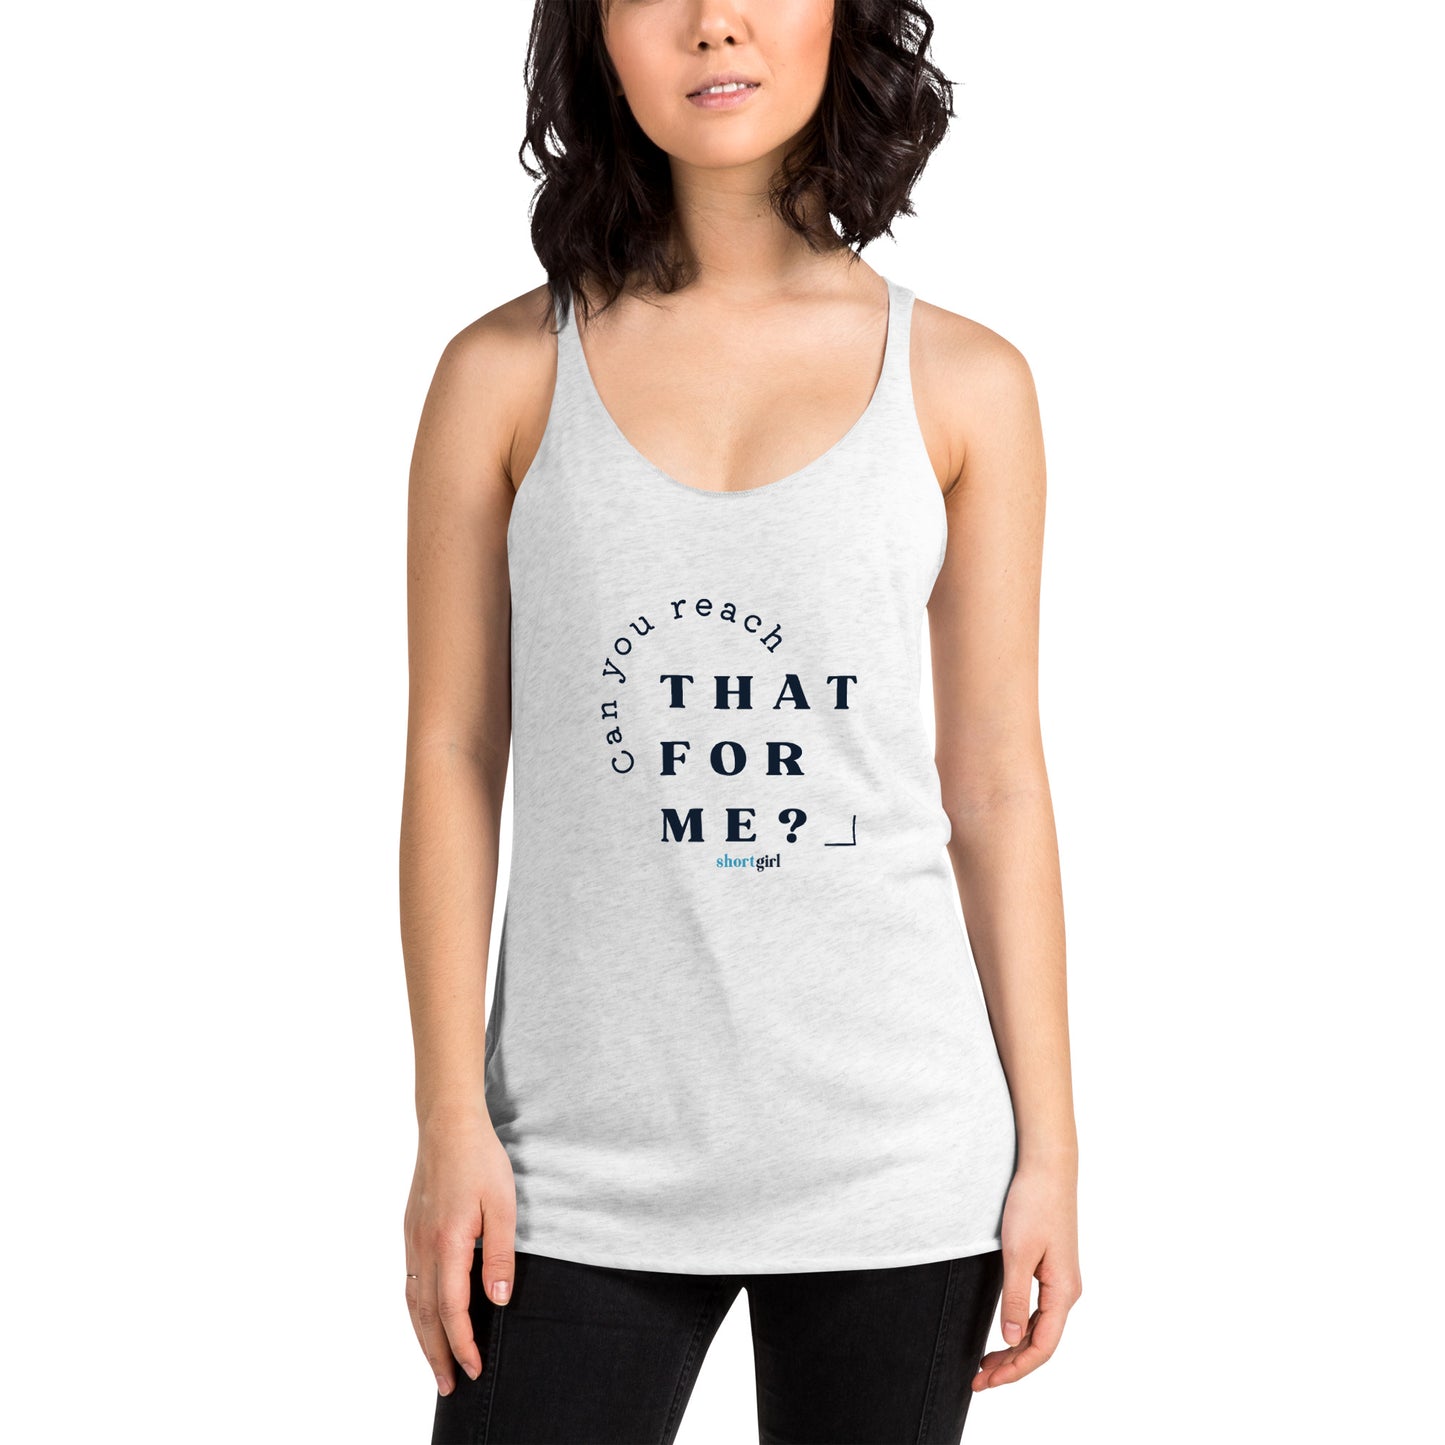 Women's Racerback Tank - Can you reach that for me?